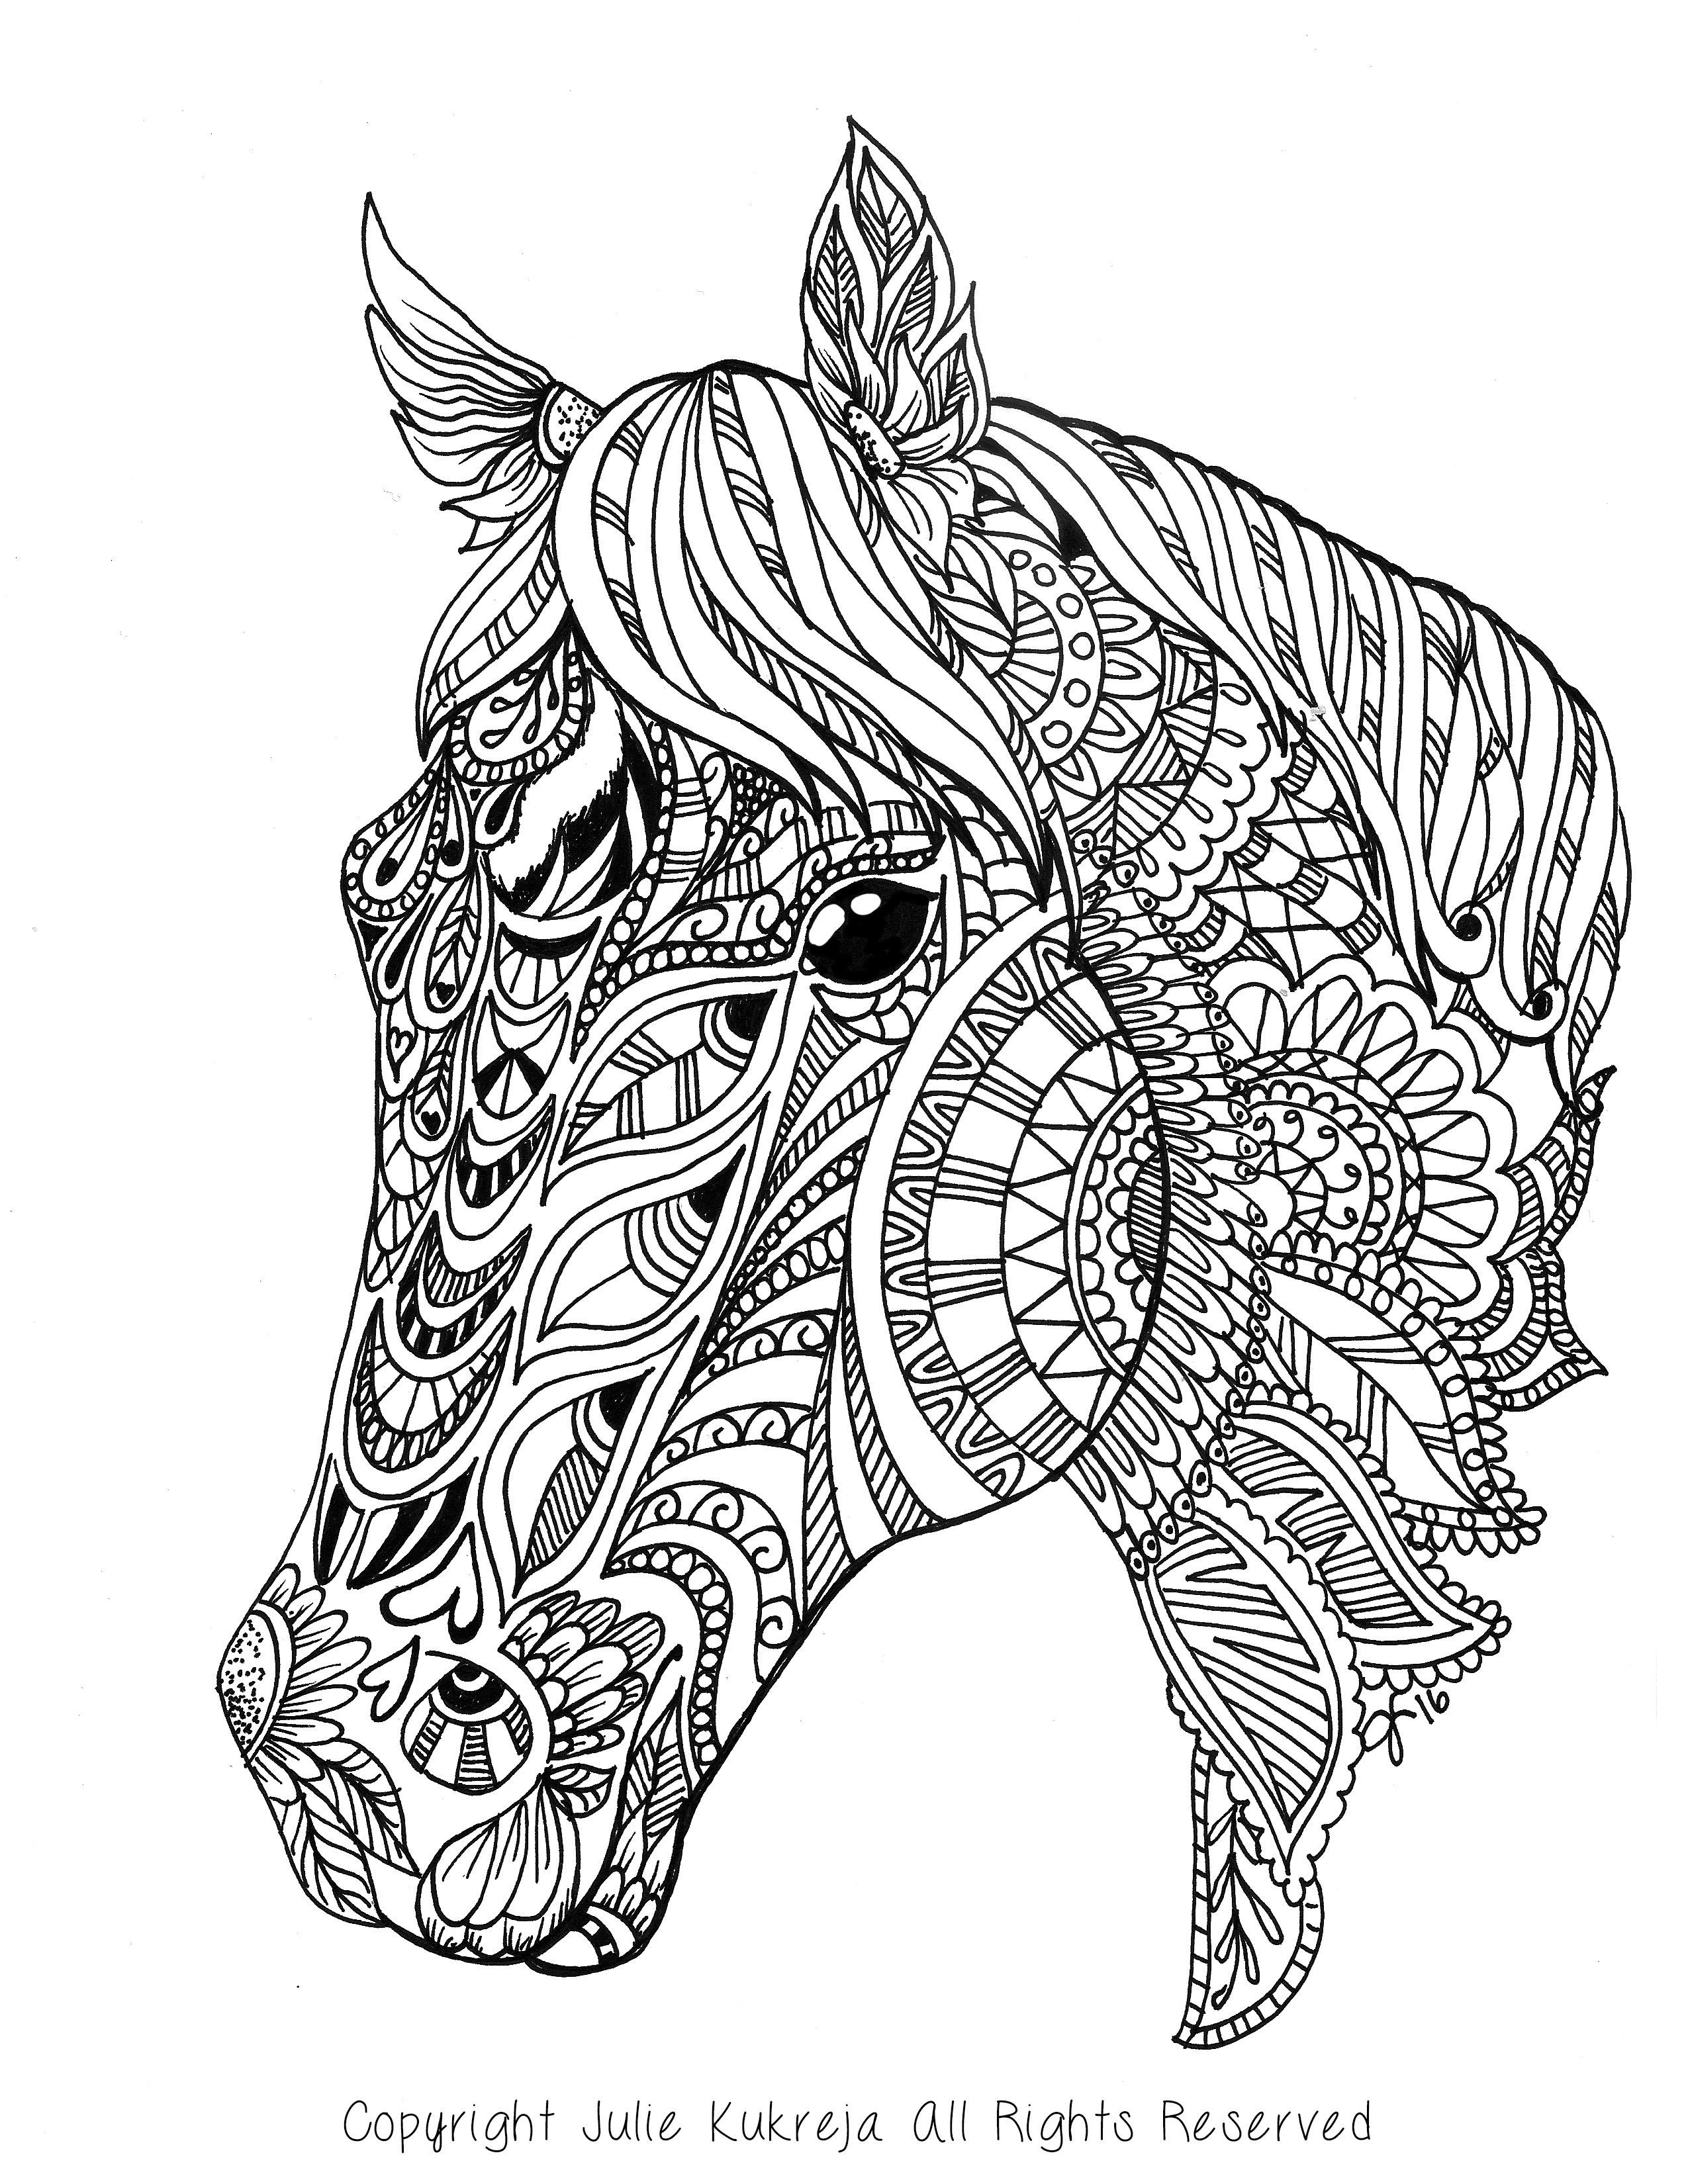 Coloring Pages For Adults Horses
 Custom Pet Portrait horse adult coloring book style by